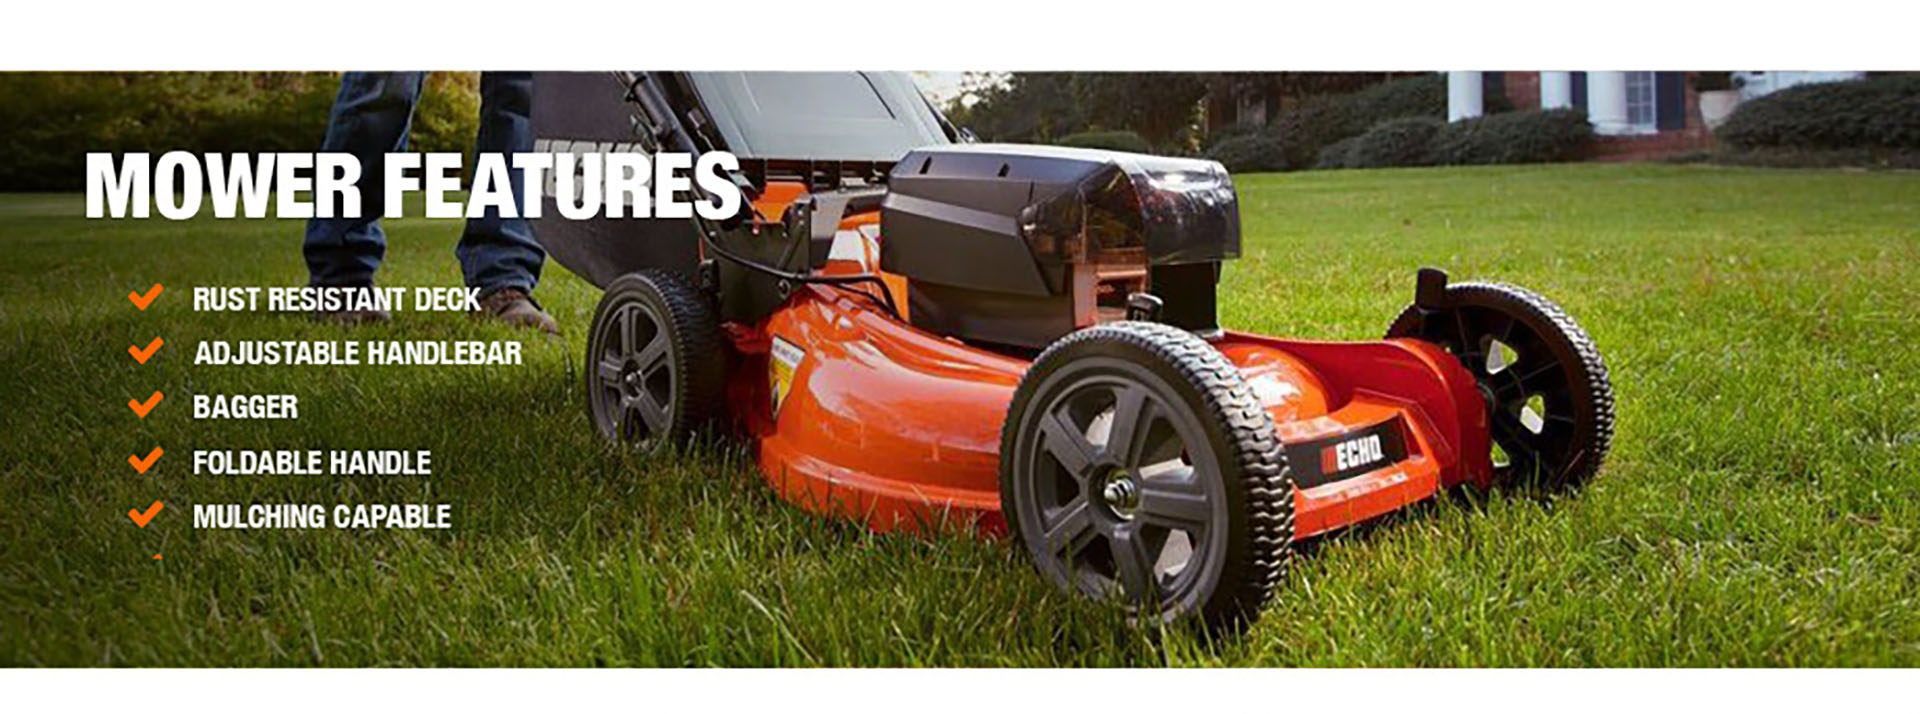 Mower Features